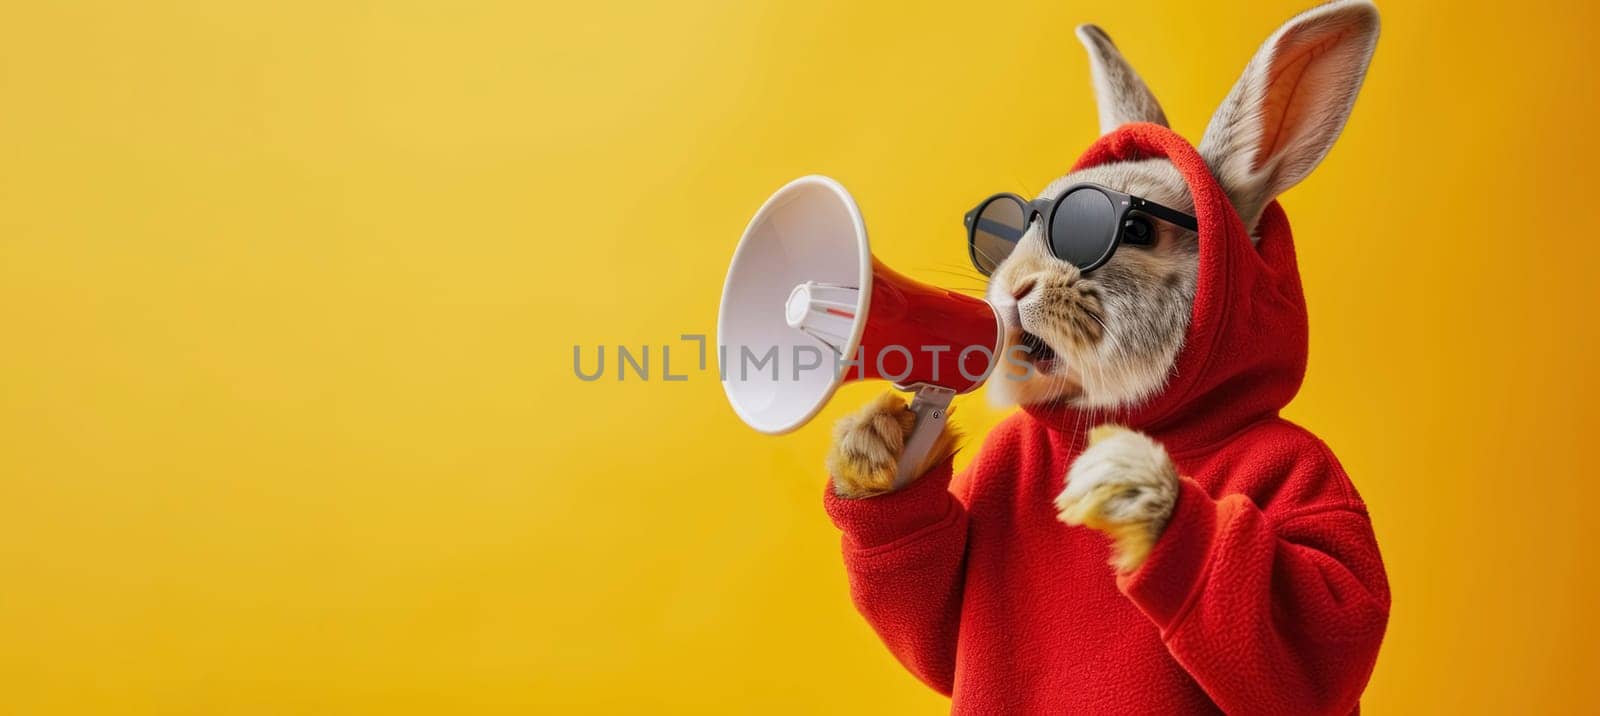 Rabbit in hoodie and sunglasses speaking into a megaphone